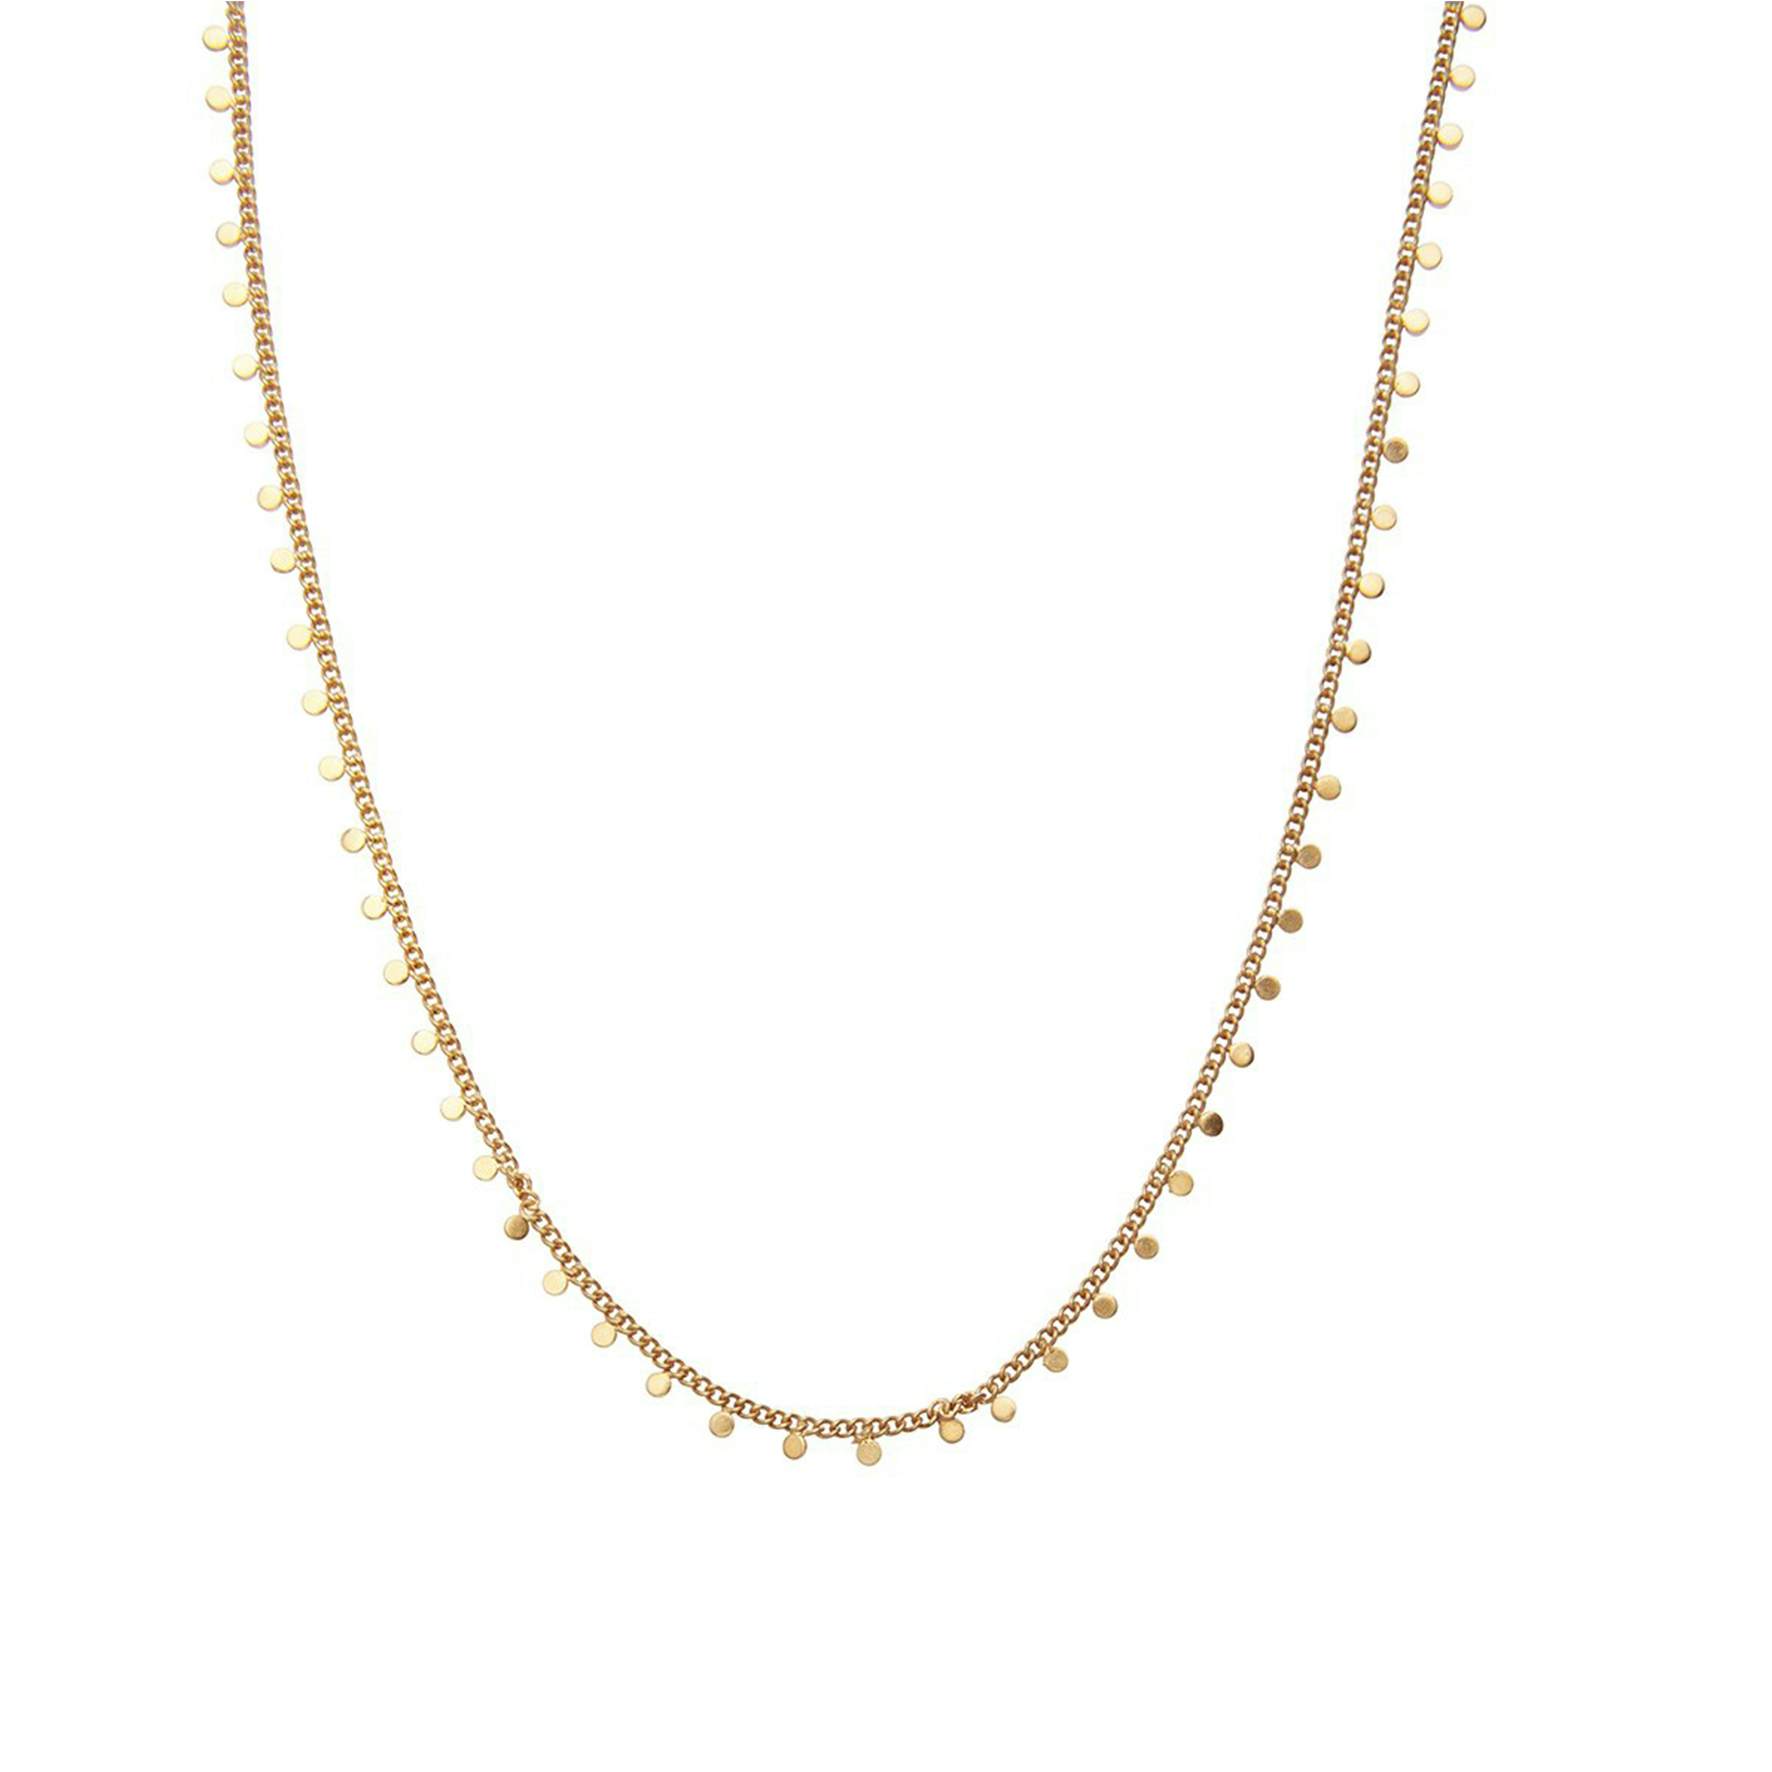 Emerson Necklace from Pico in Goldplated Brass